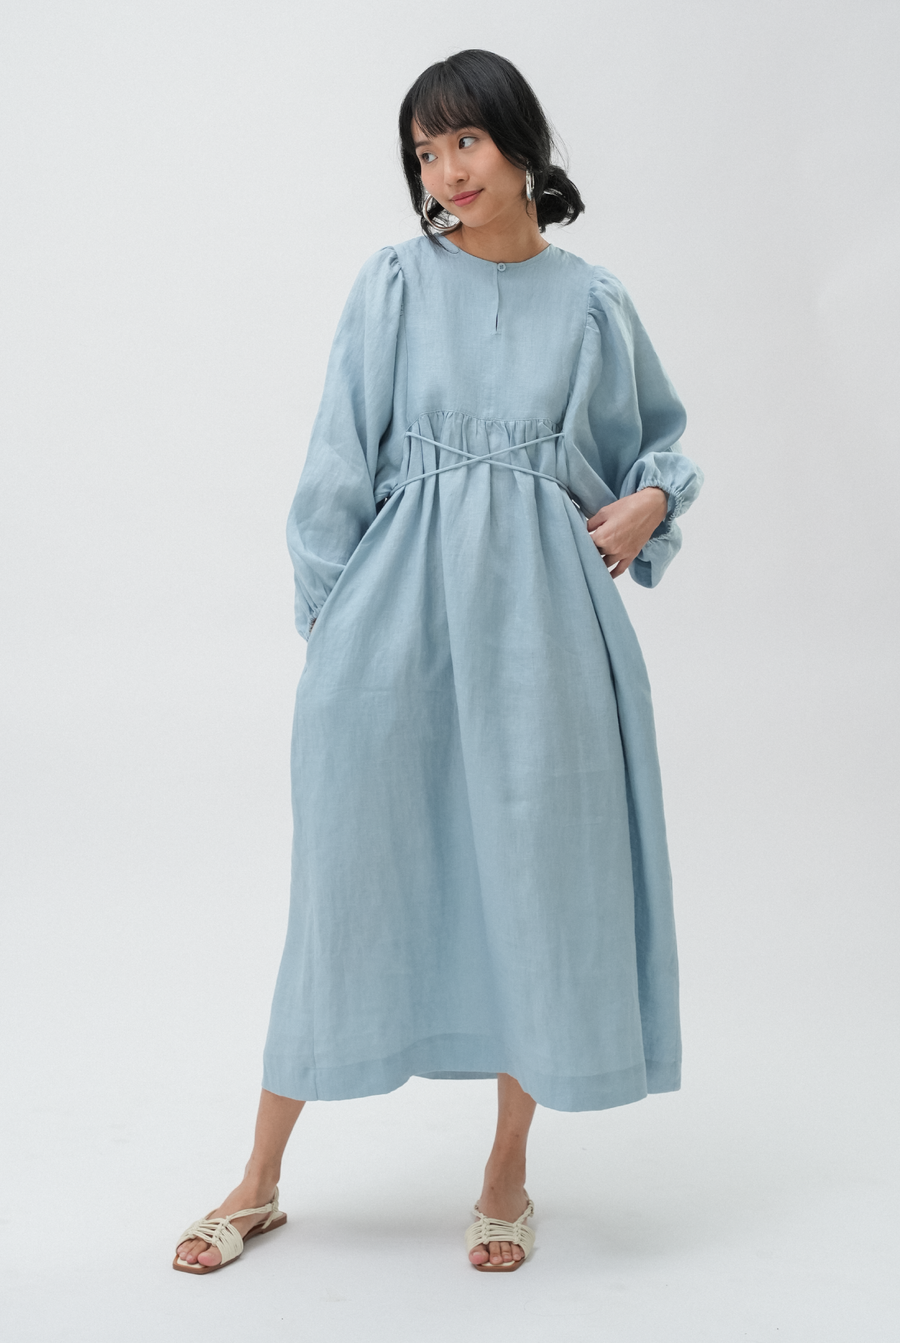 Daydream Linen Dress in Coral Blue